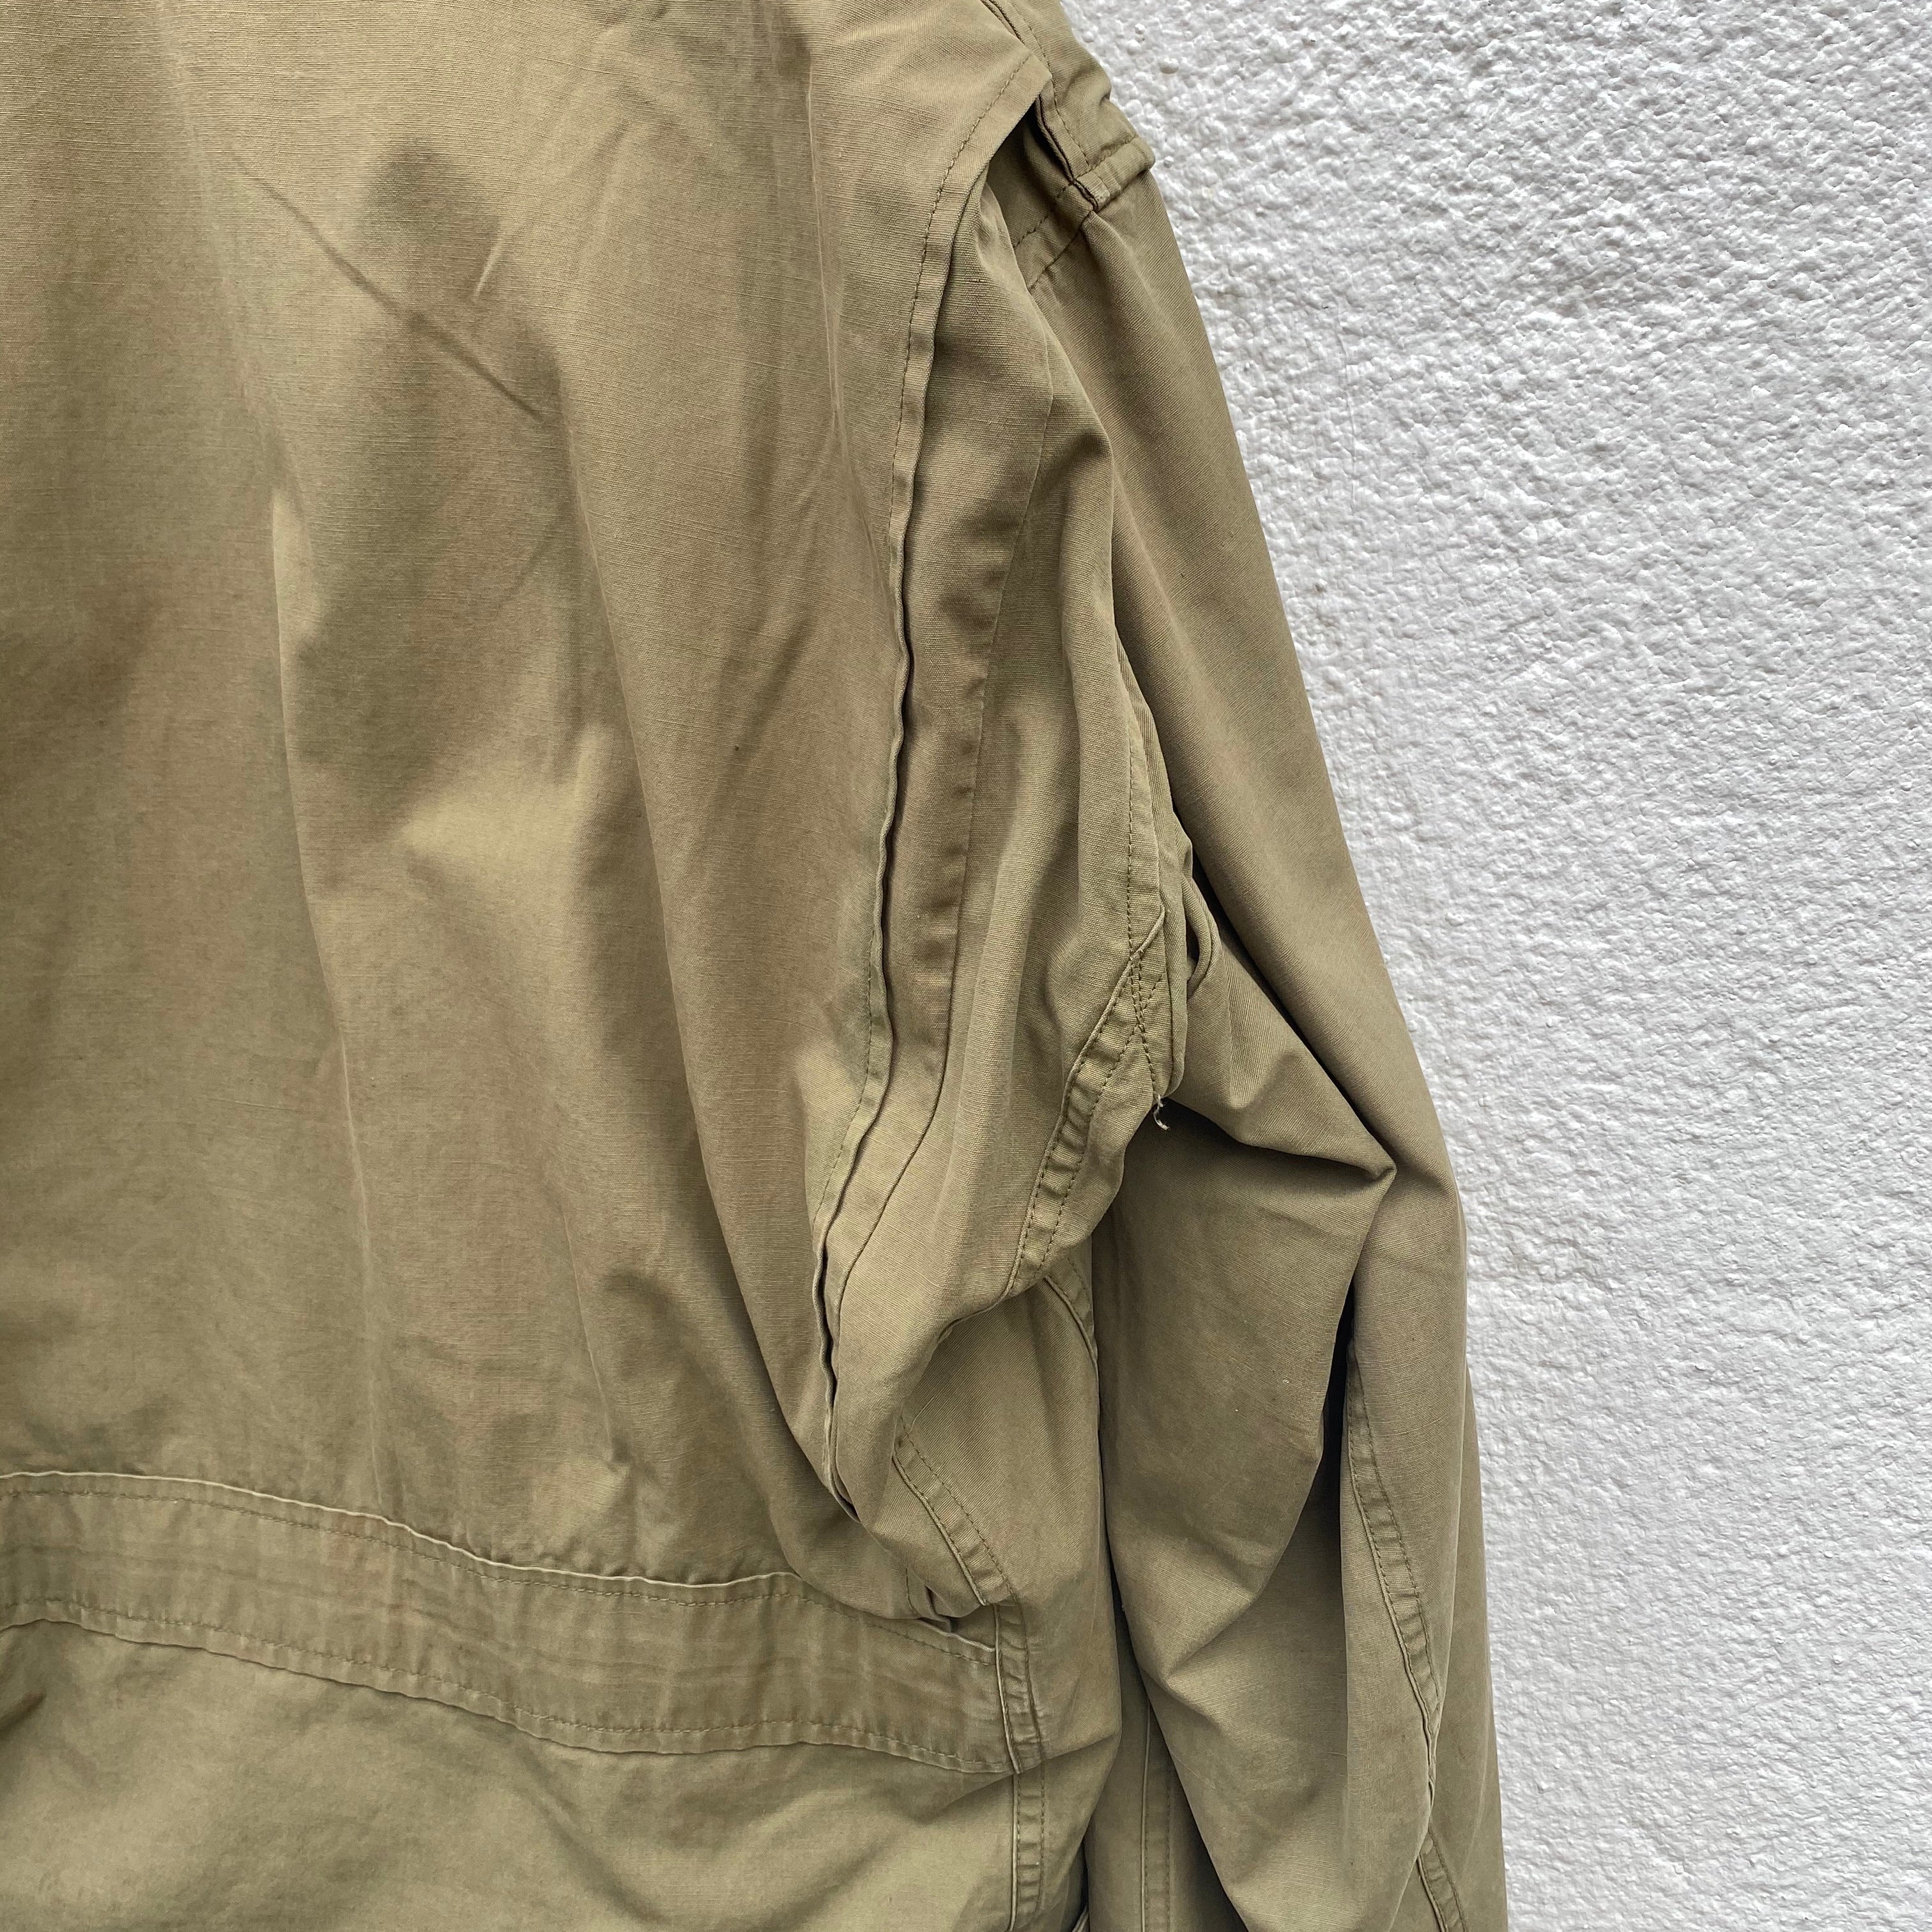 [ ONLY ONE ! ] US ARMY M-41 FIELD JACKET / Mr.Clean Select